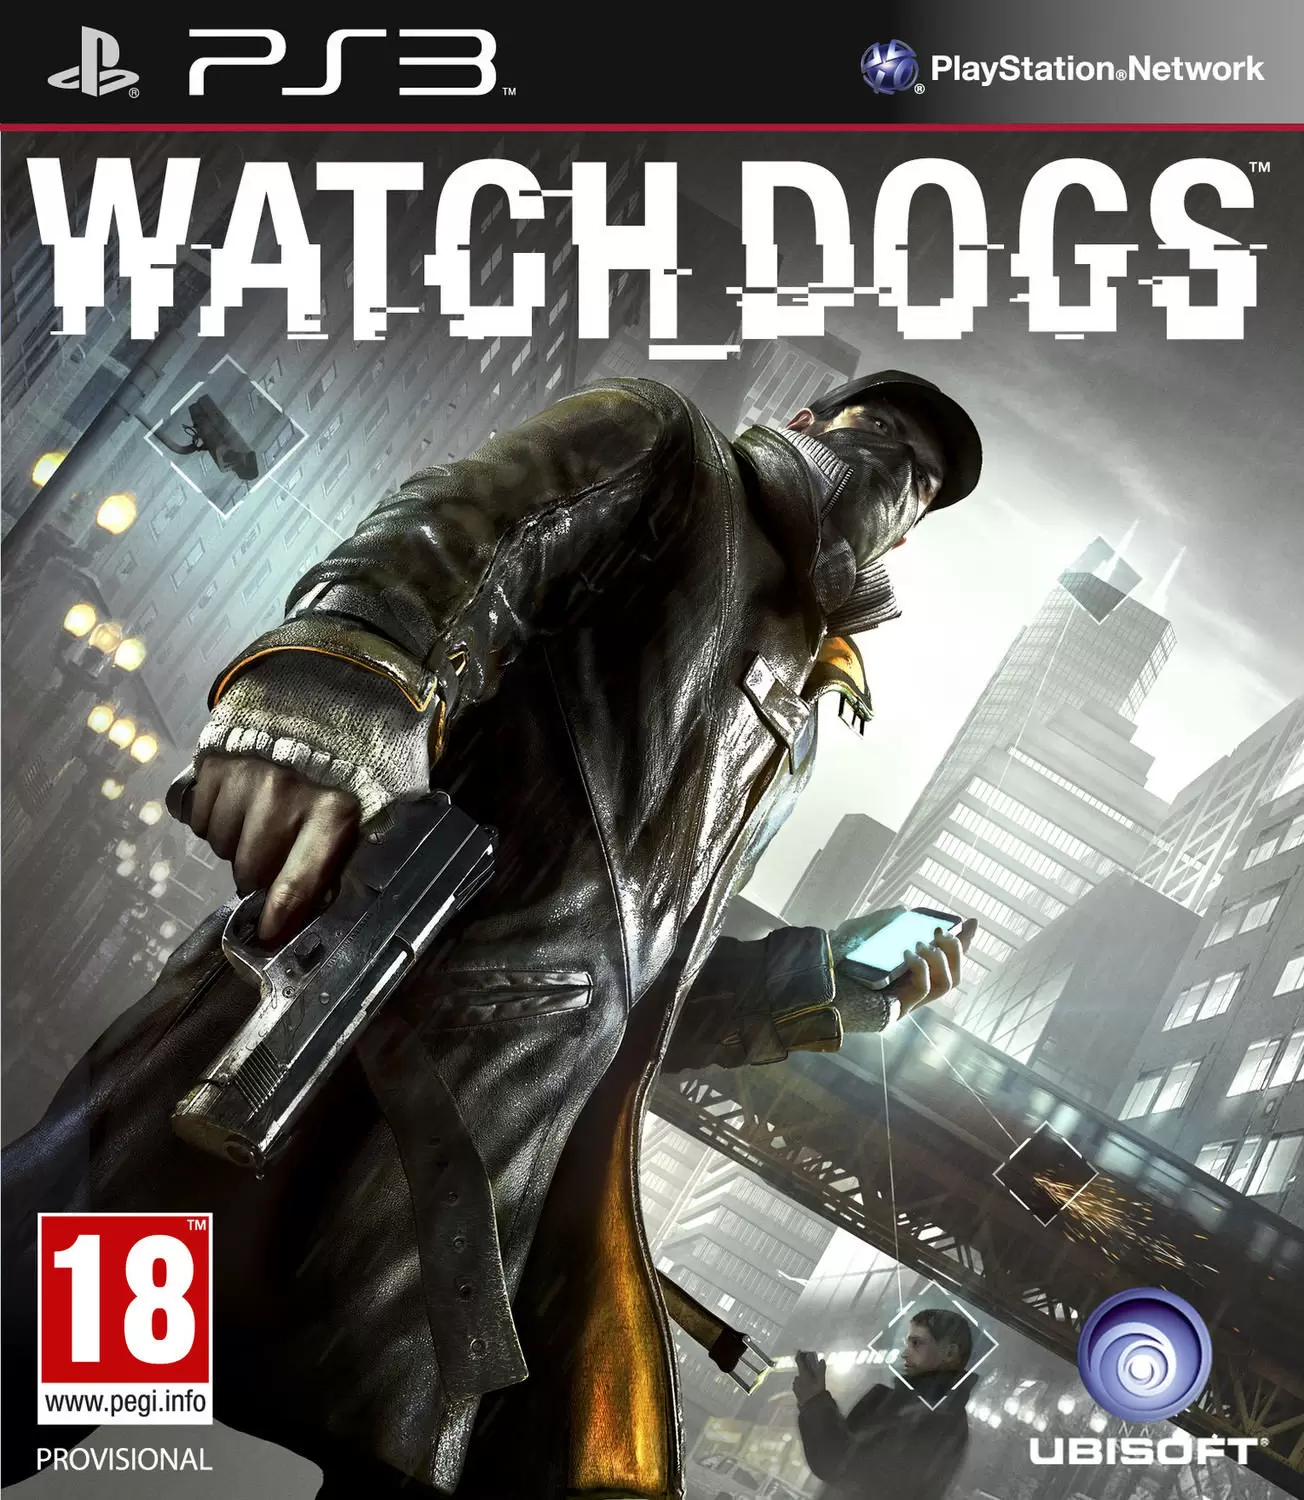 PS3 Games - Watch Dogs